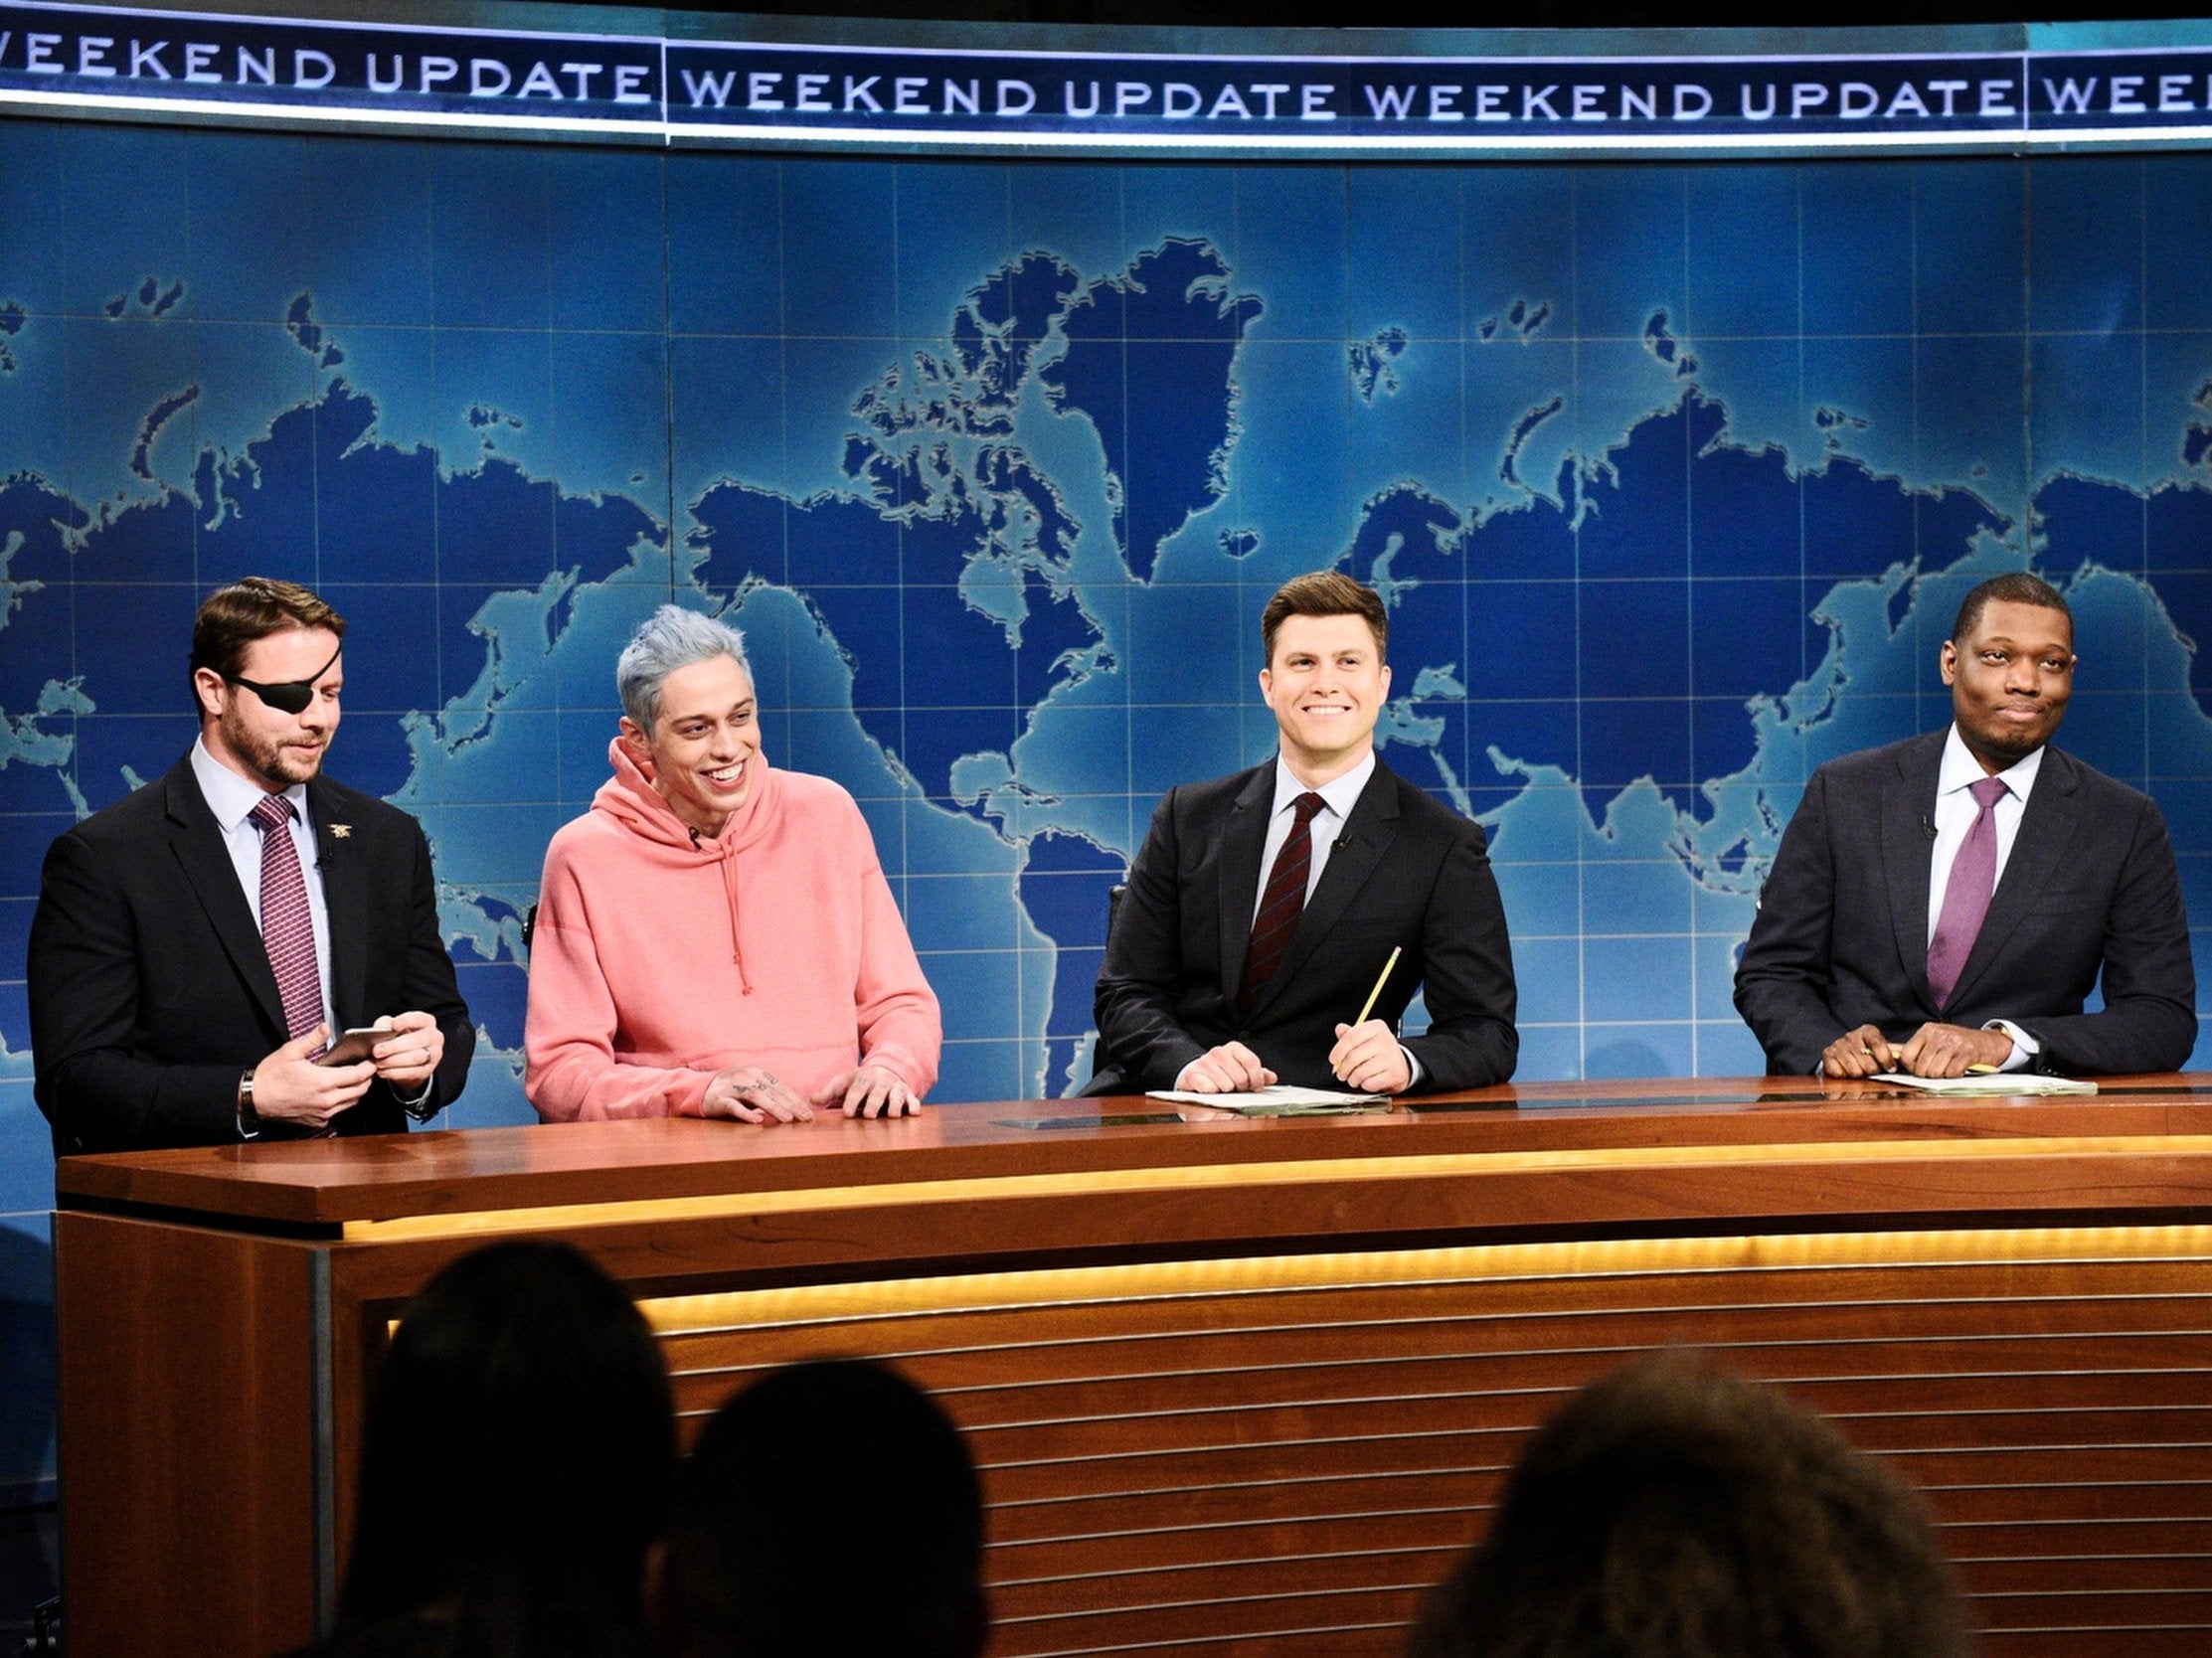 (From left) Dan Crenshaw, anchors Pete Davidson, Colin Jost, and Michael Che appear during Saturday Night Live on 10 November (Will Heath/NBC